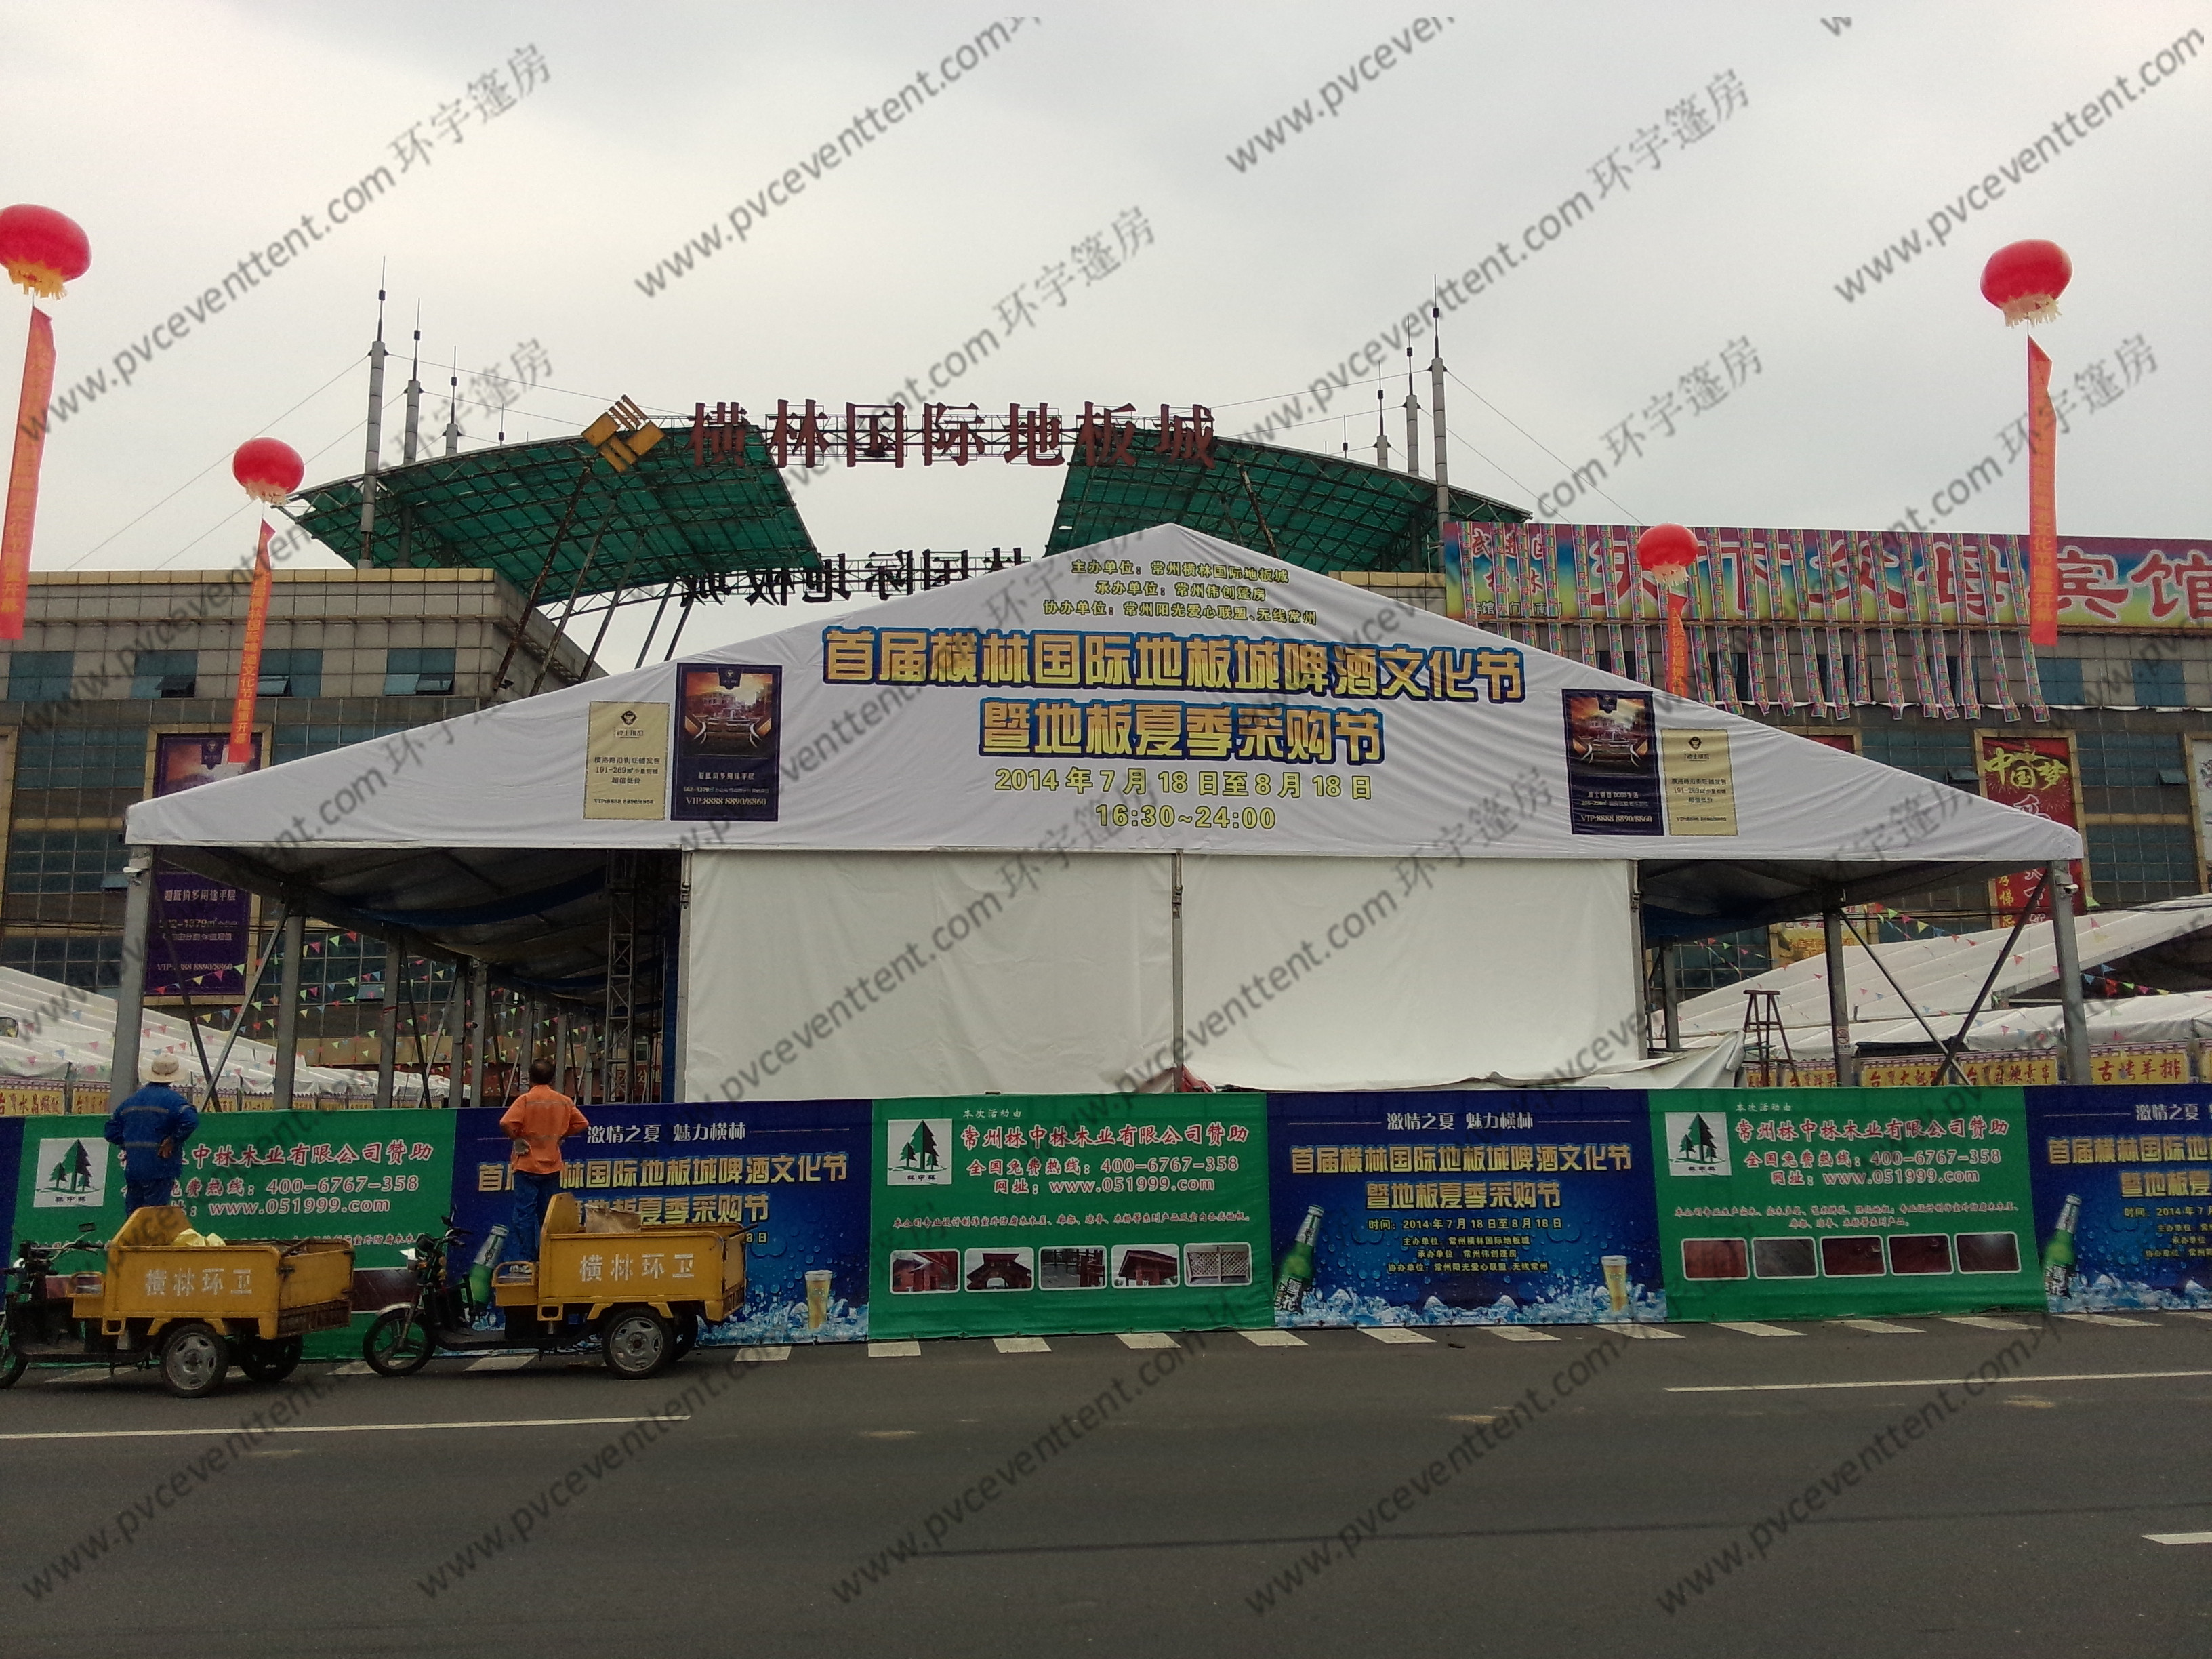 20m Width Outdoor Exhibition Tents , Inflatable Exhibition Tent For Beer Festival Celebration